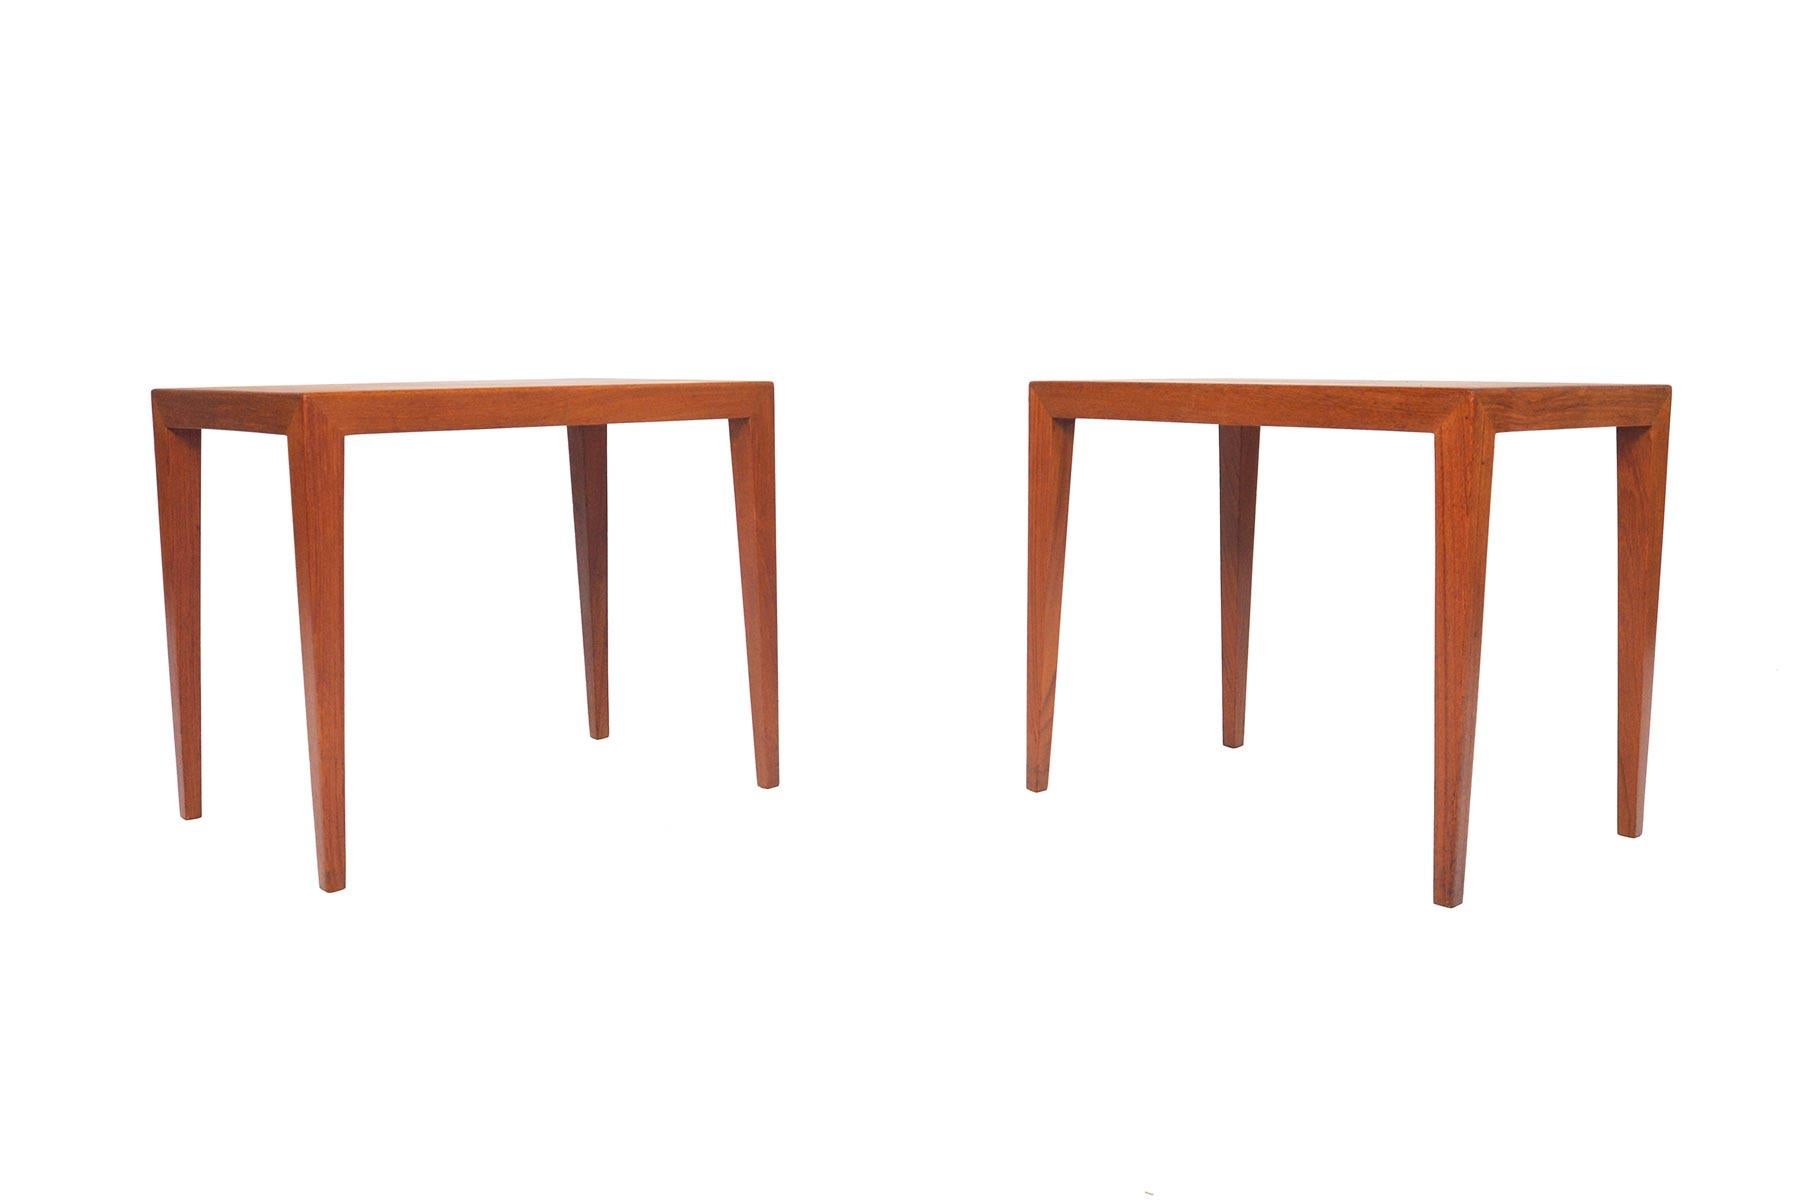 This pair of Danish modern teak side tables was designed by Severin Hansen for Haslev Møbelsnedkeri in the early 1960s. Underneath the refined, handsome lines of these tables lies an extremely high level of skilled craftsmanship, which can be seen